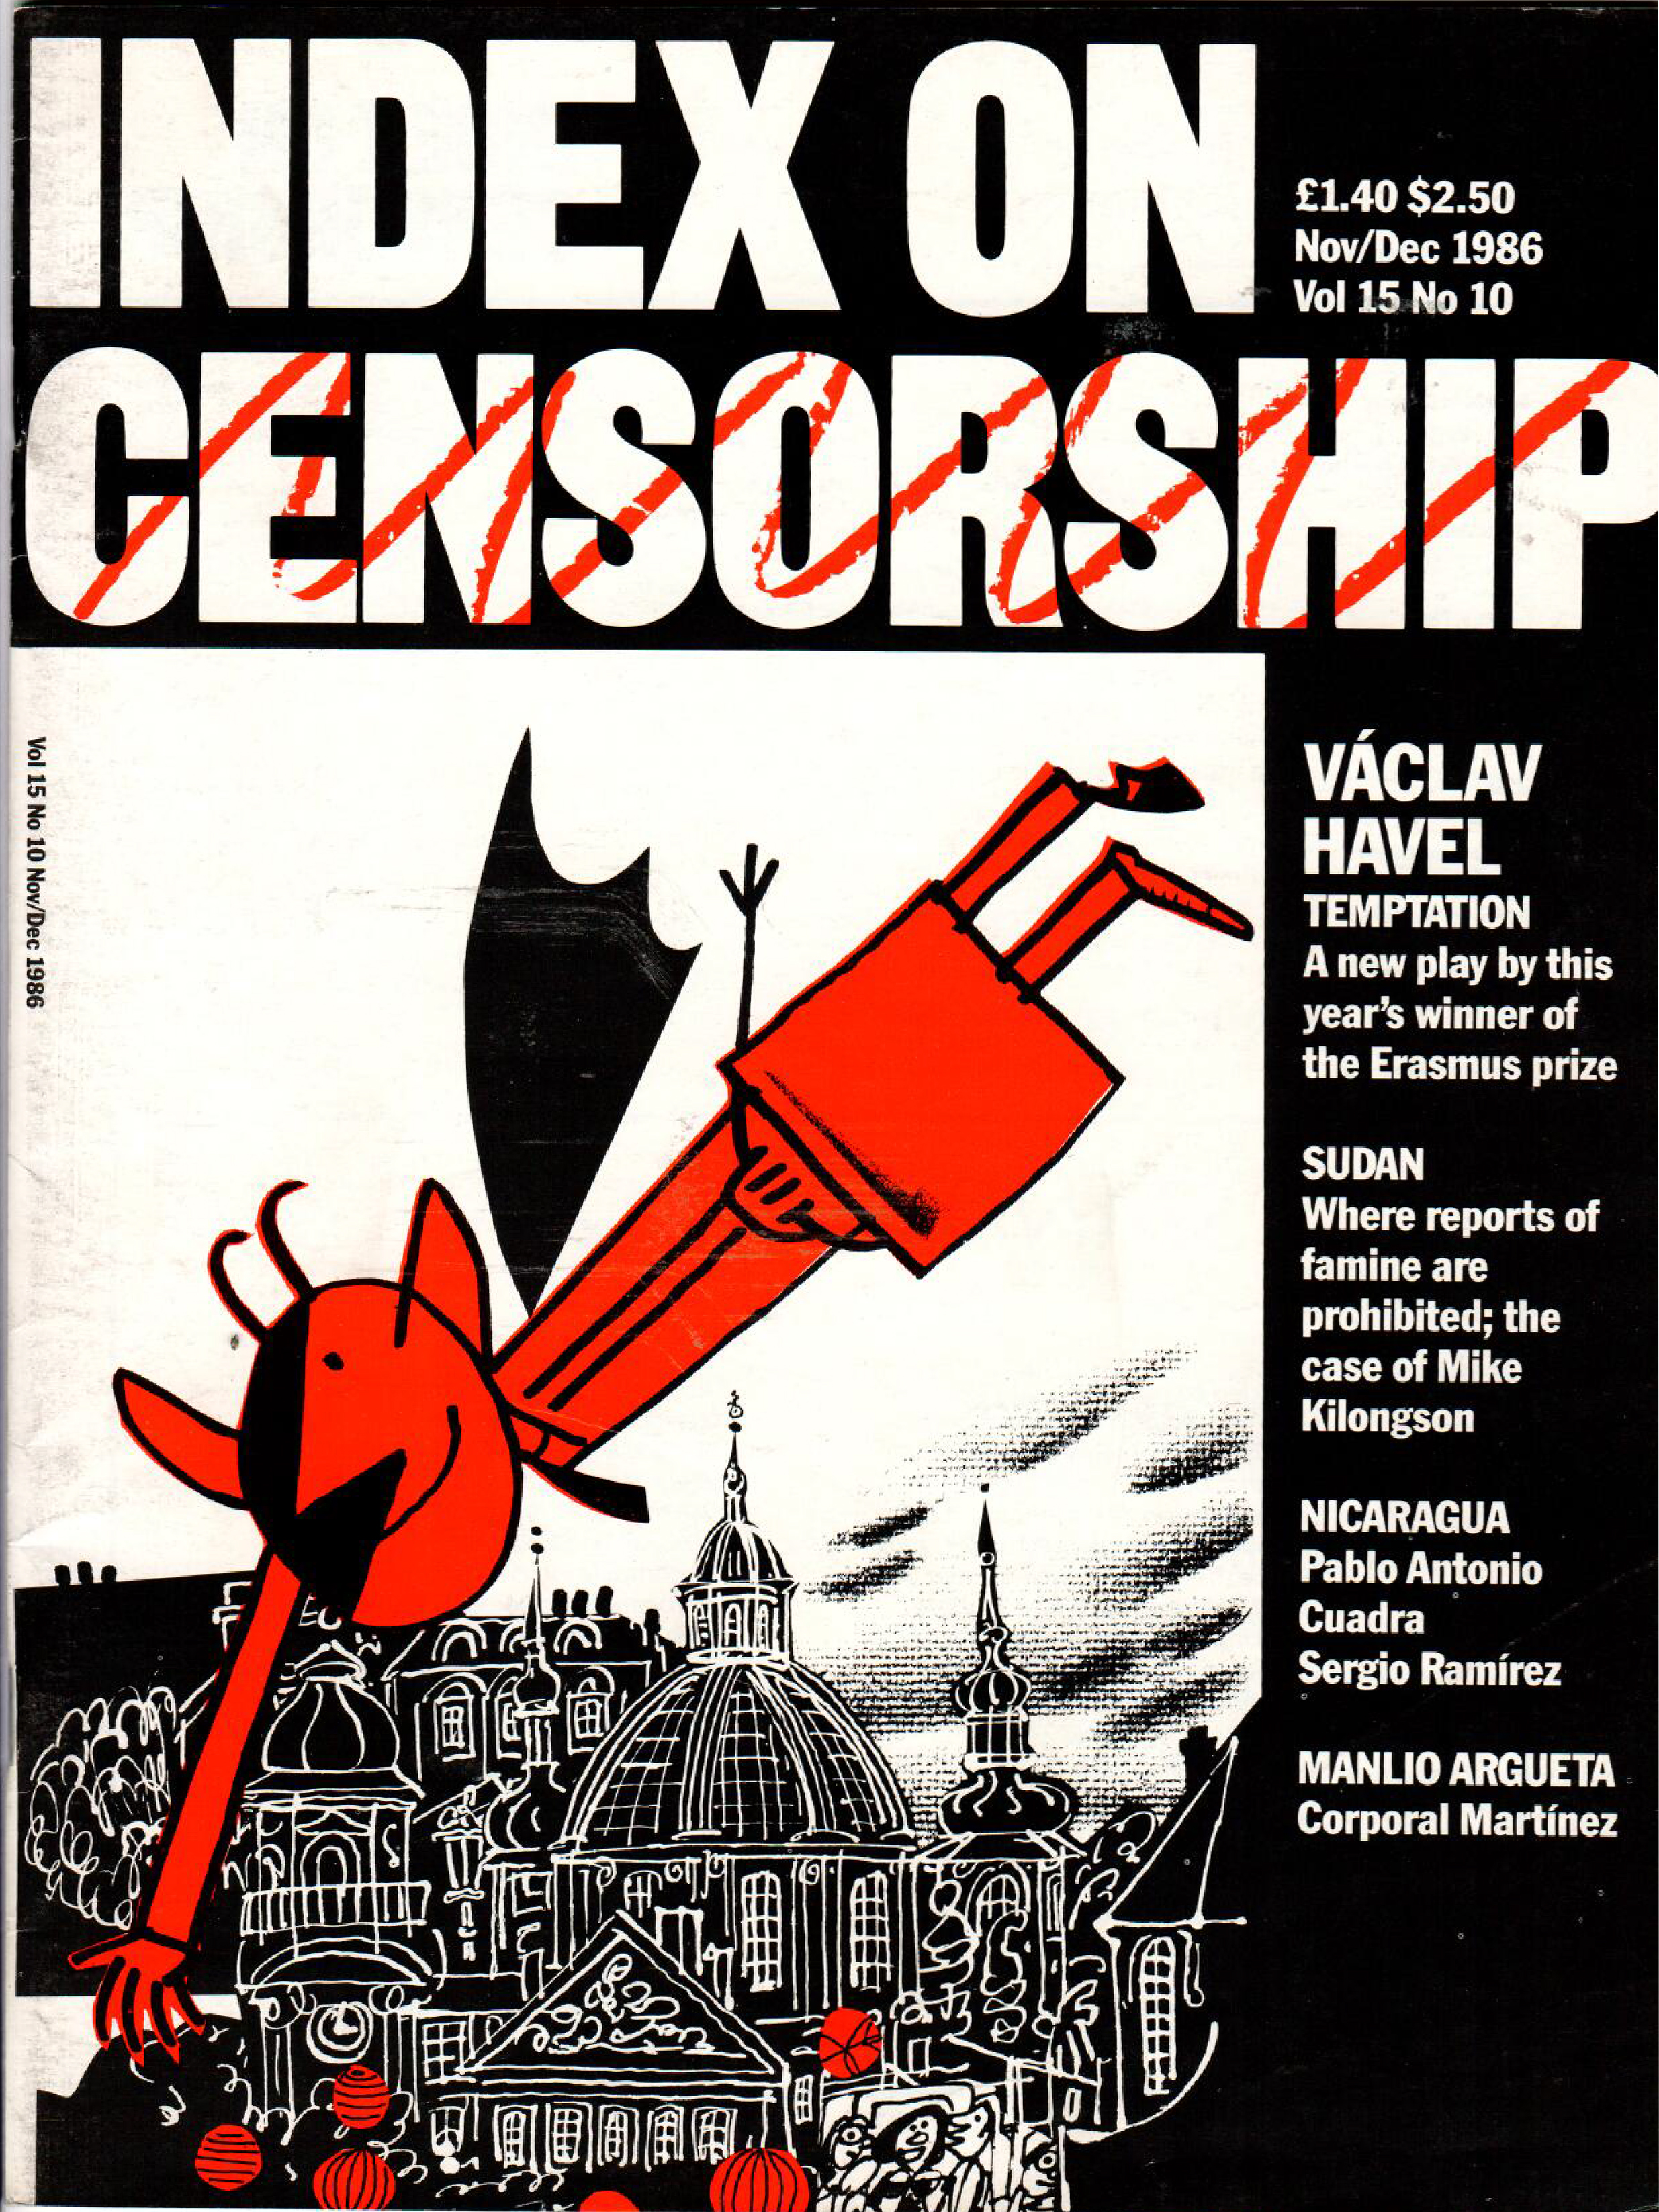 Temptation: A new play by this year's winner of the Erasmus Prize, the November/December 1986 issue of Index on Censorship magazine